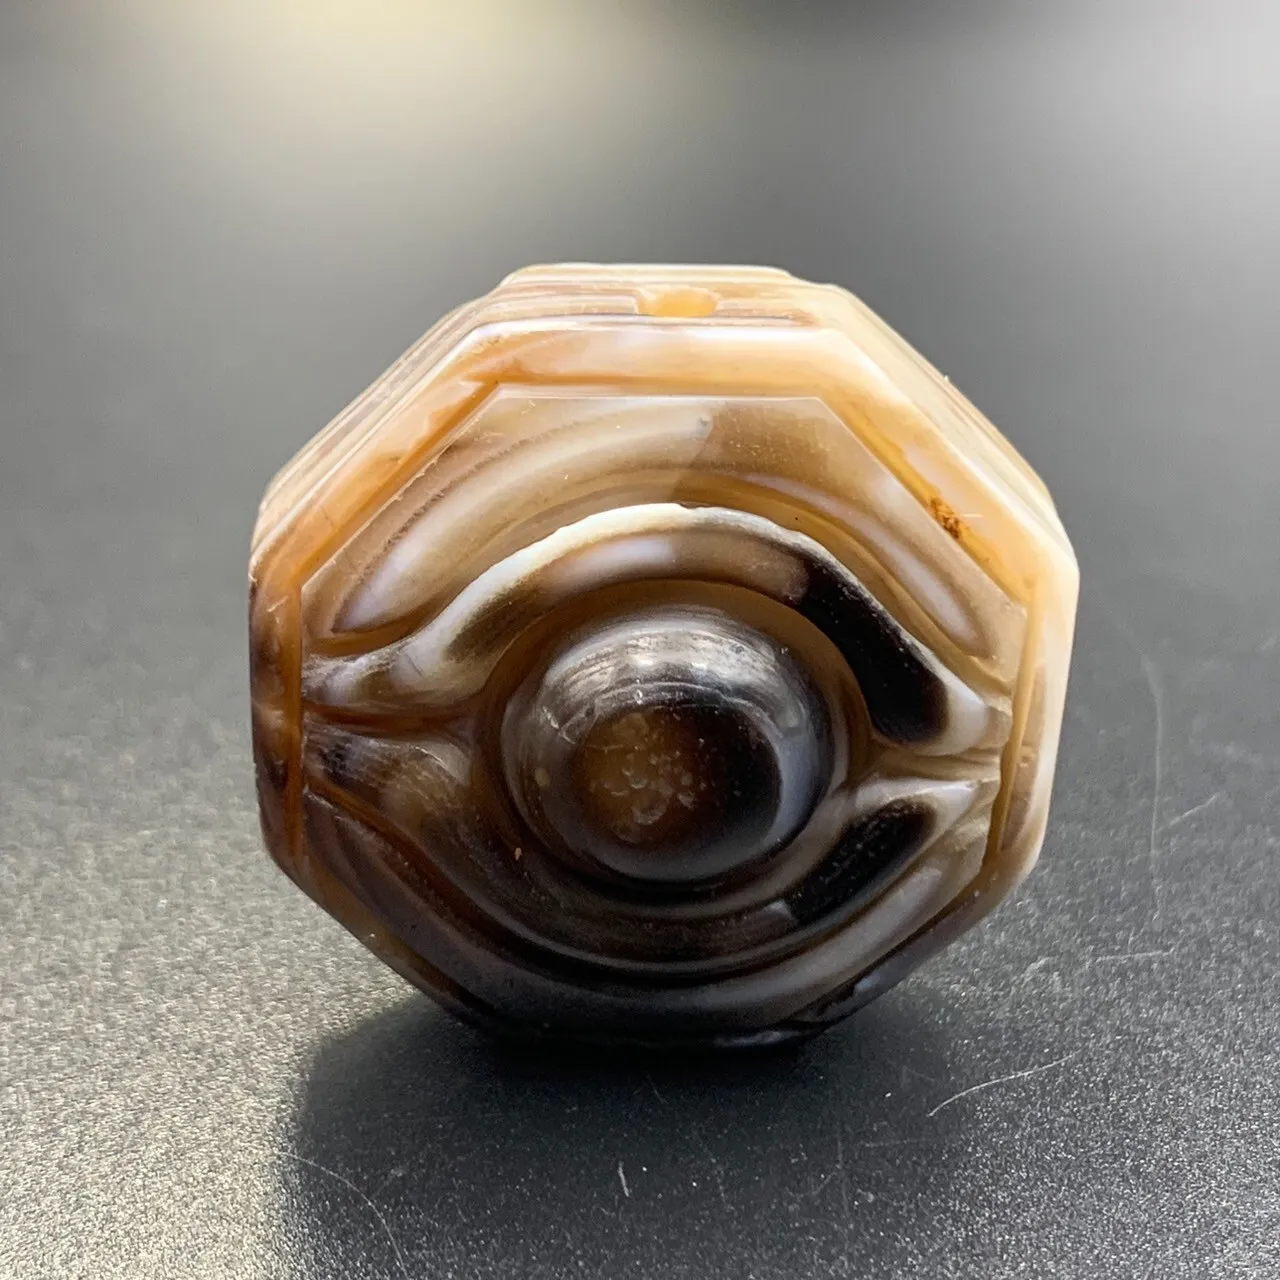 Awesome Himalayan Carved Agate Bead, Himalayan Asian Agate Bead, LBBR-49 - Image 5 of 6